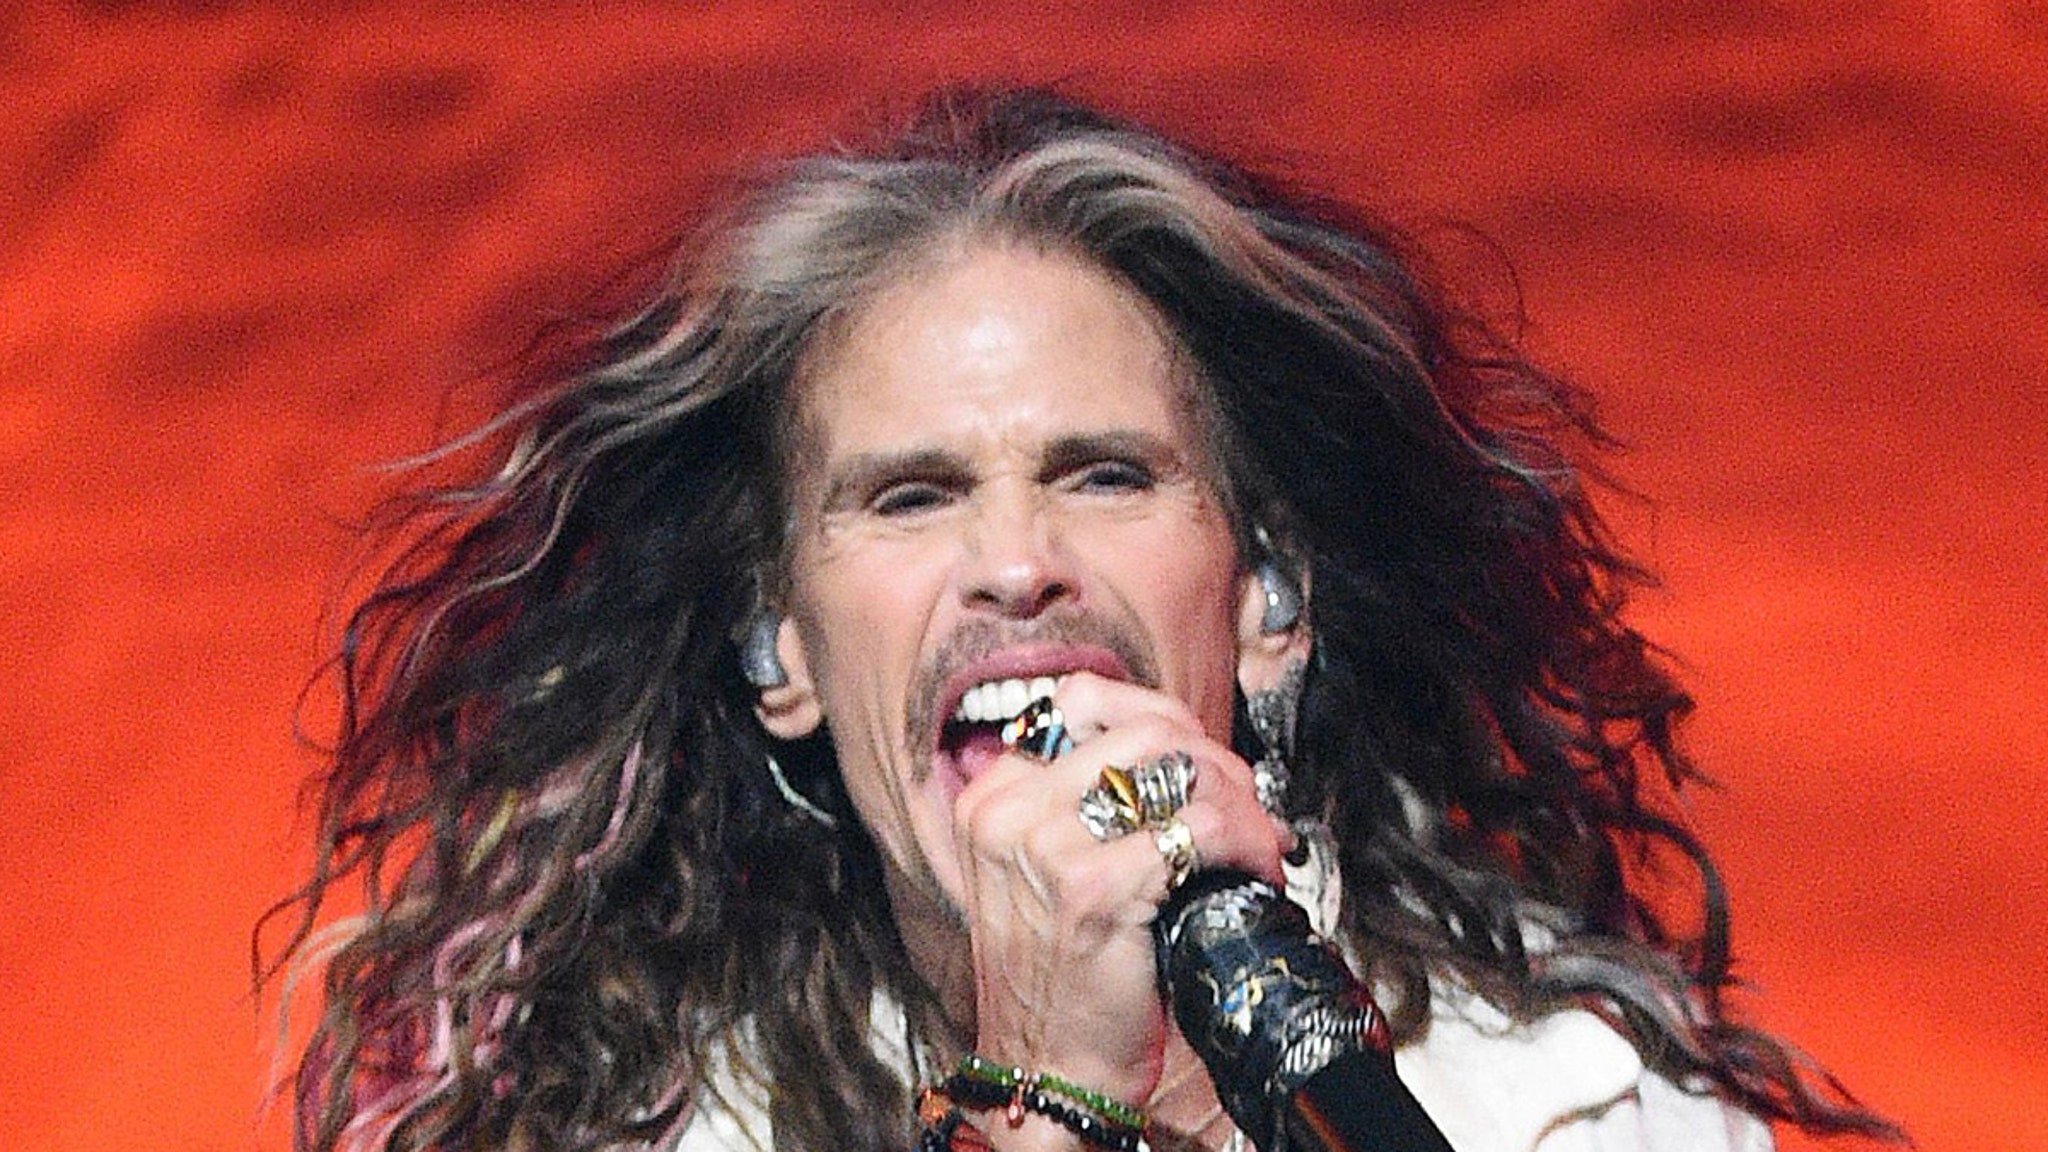 ‘Aerosmith’ Steven Tyler’s Vocal Cords are ‘Mangled’ But Will Sing Again